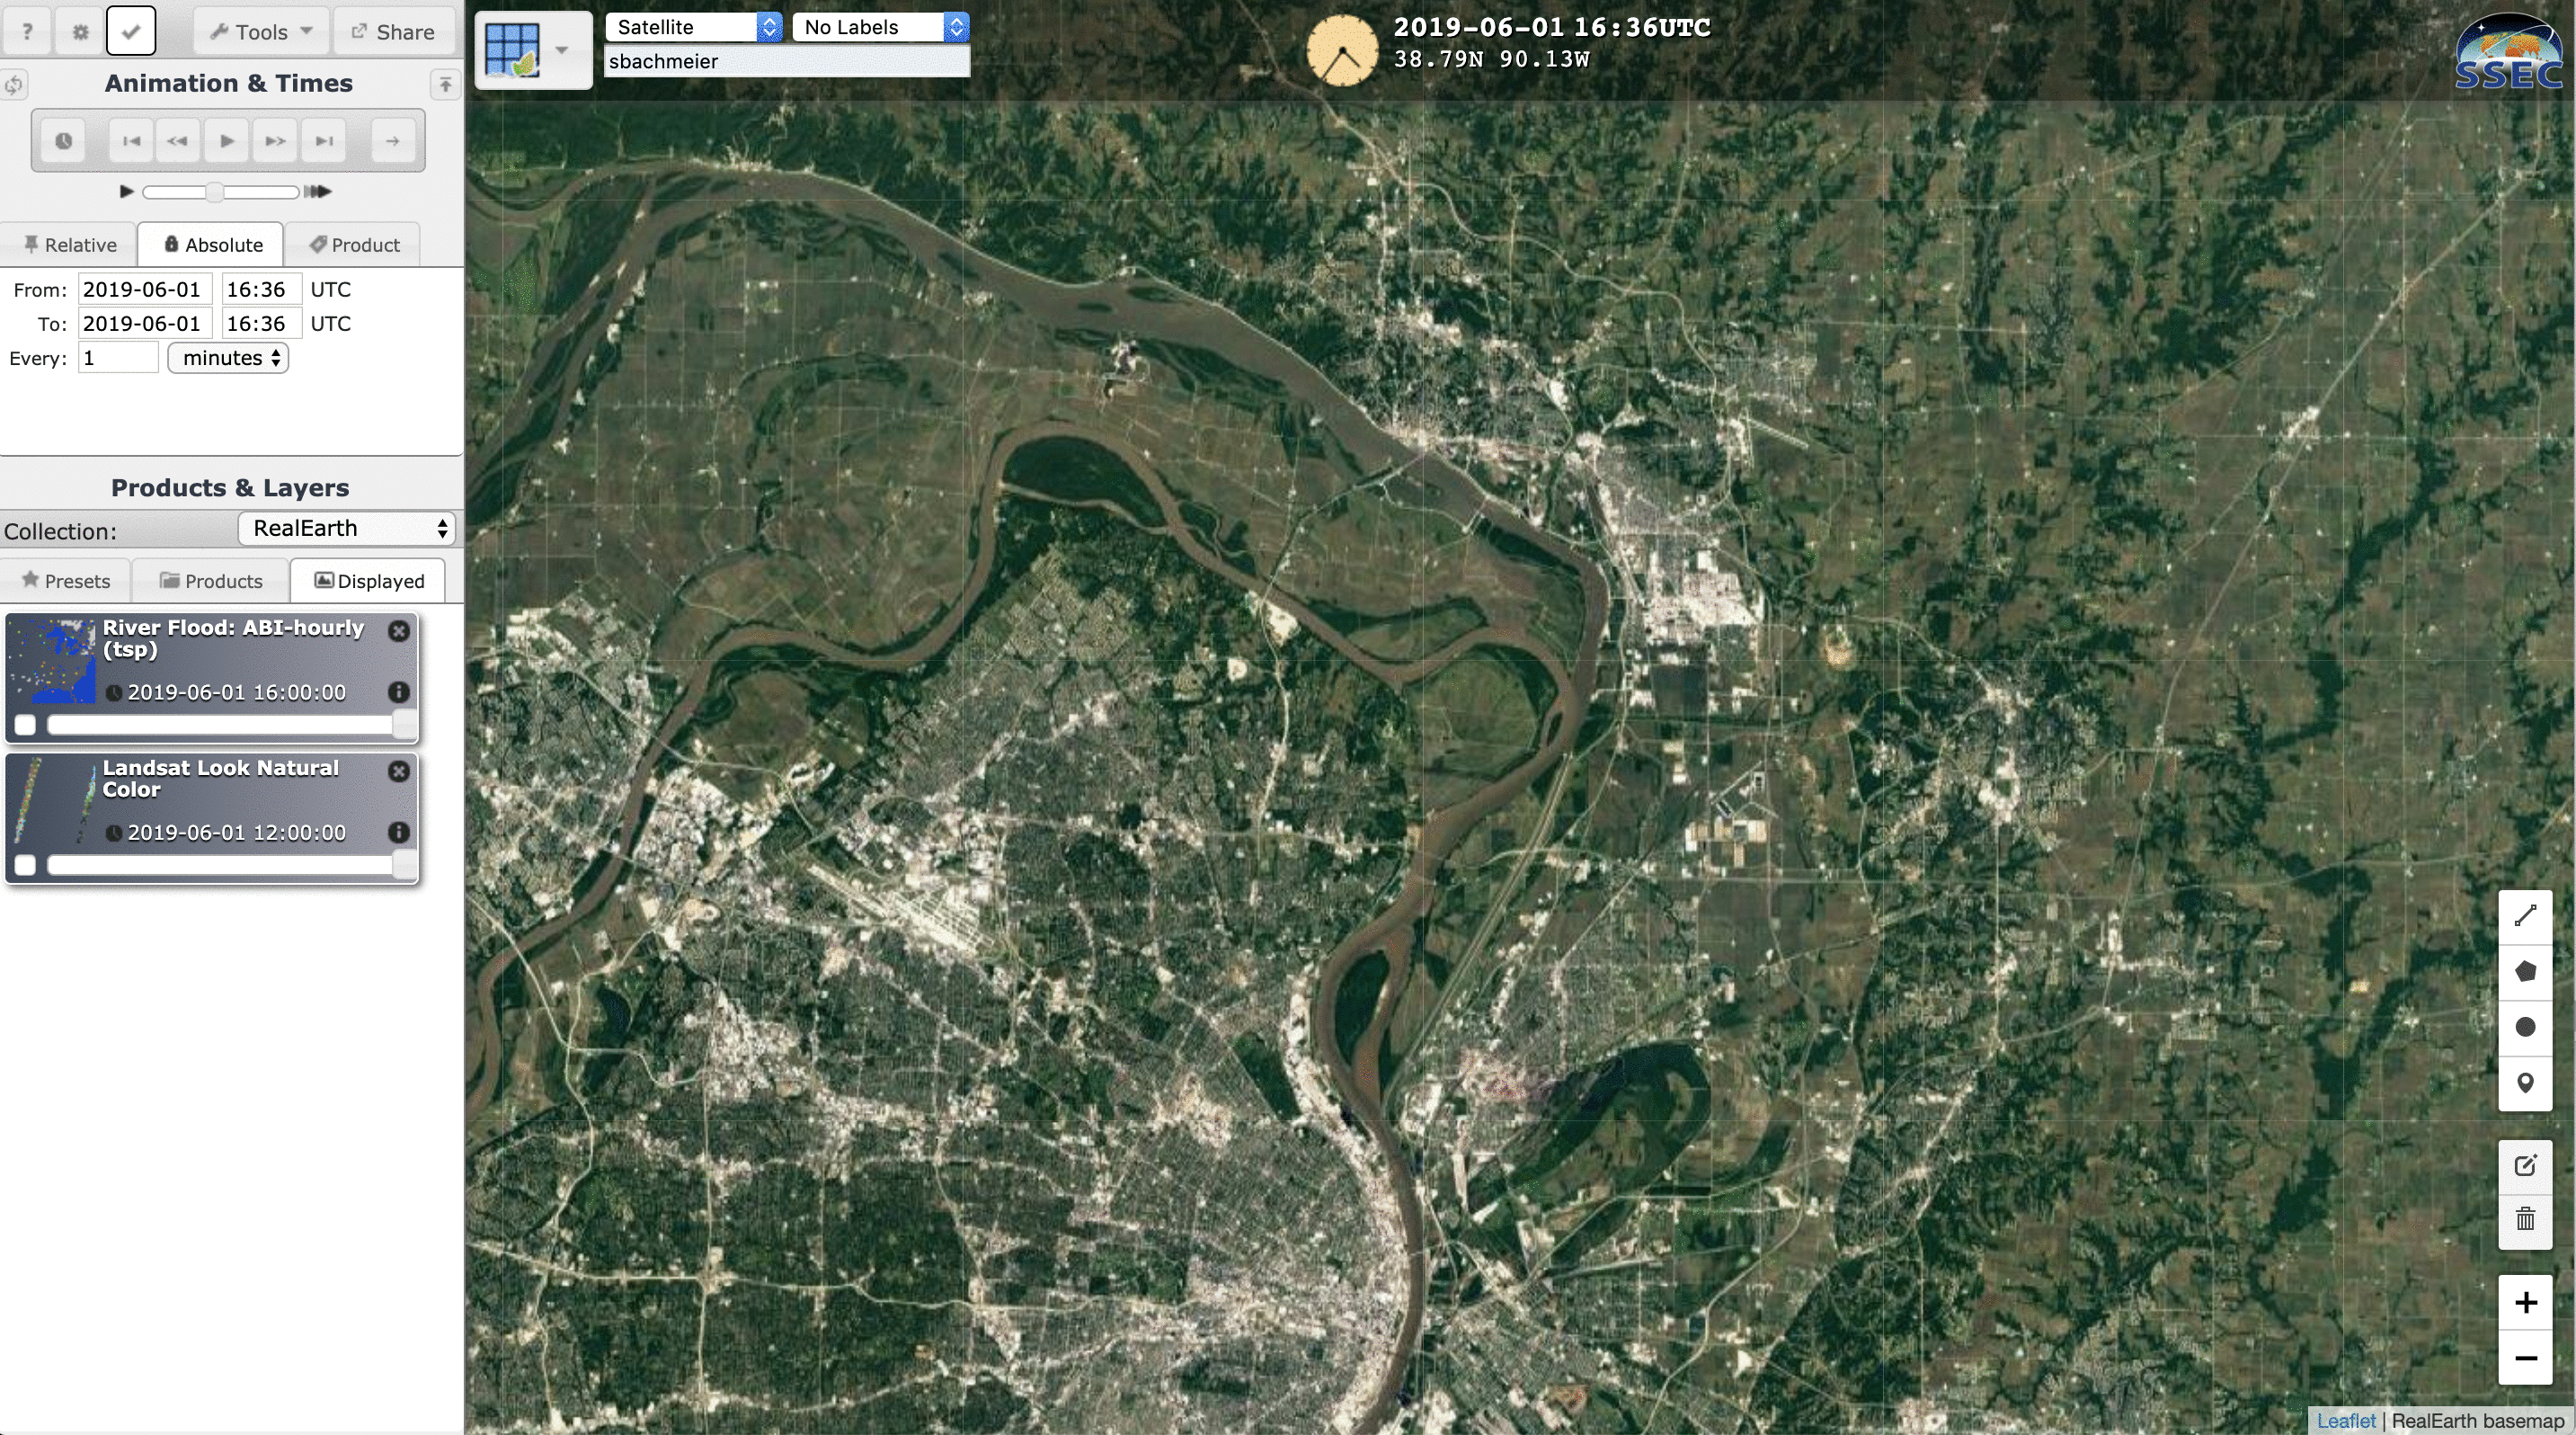 Landsat-8 False Color RGB images + GOES-16 River Flood Areal Extent product near the confluence of the Mississippi and Missouri Rivers [click to enlarge]